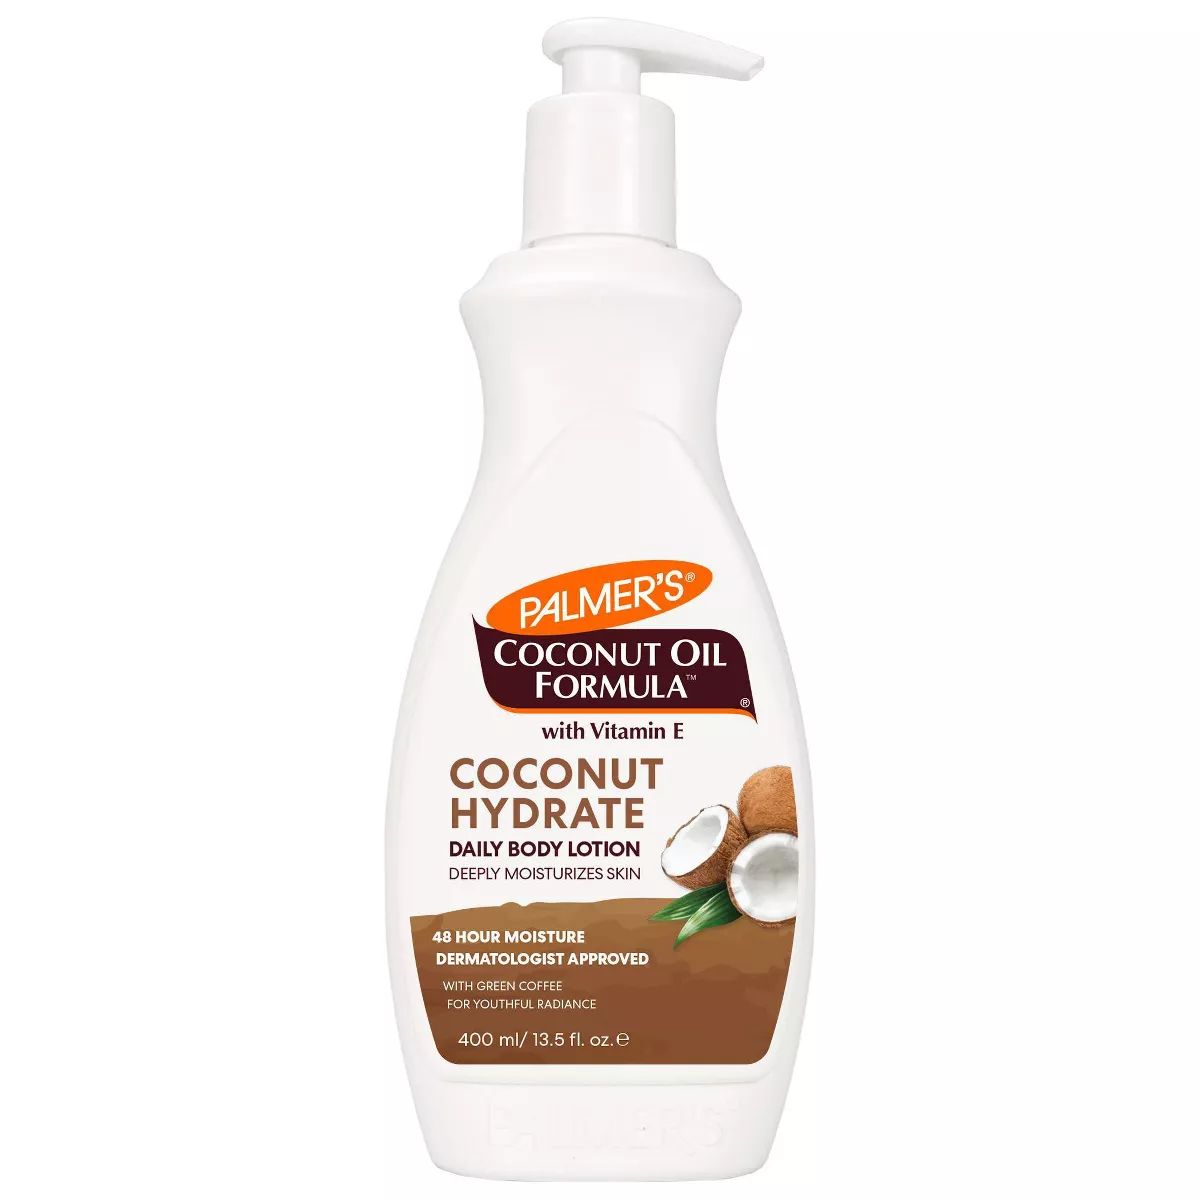 Palmers Coconut Oil Formula Body Lotion | Target